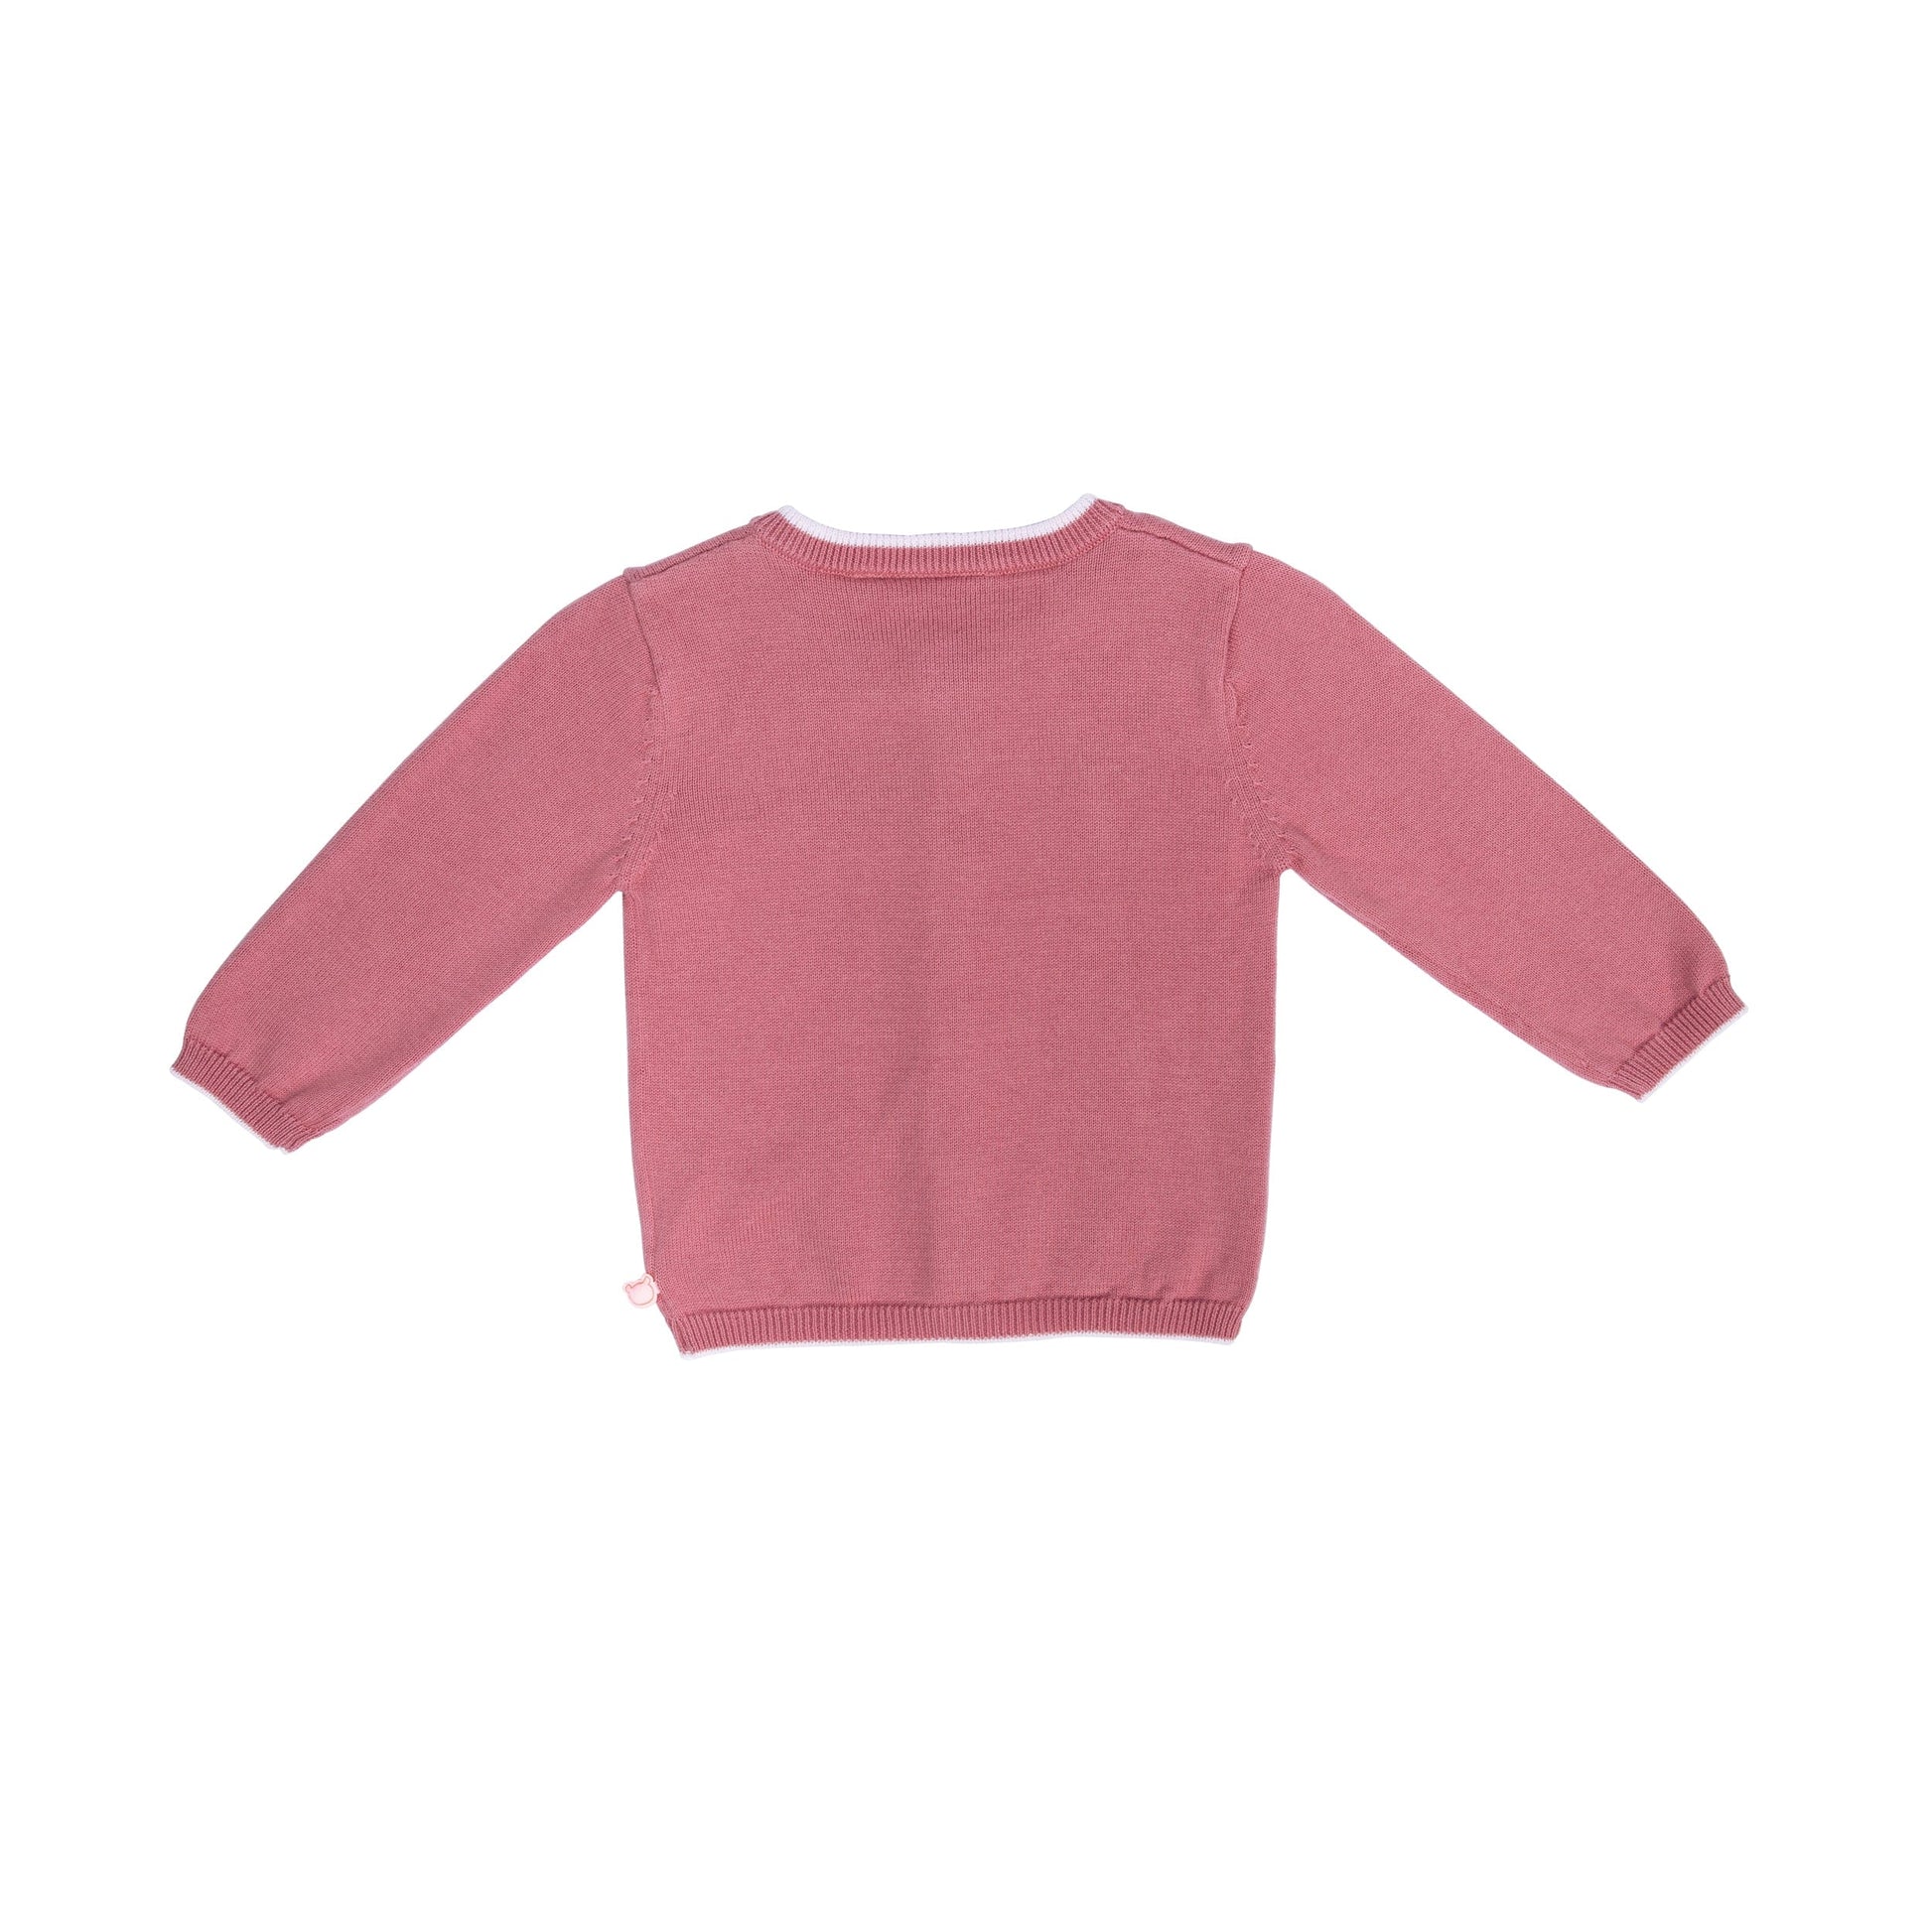 Noukie's Tops Pink cardigan with soft pink trim